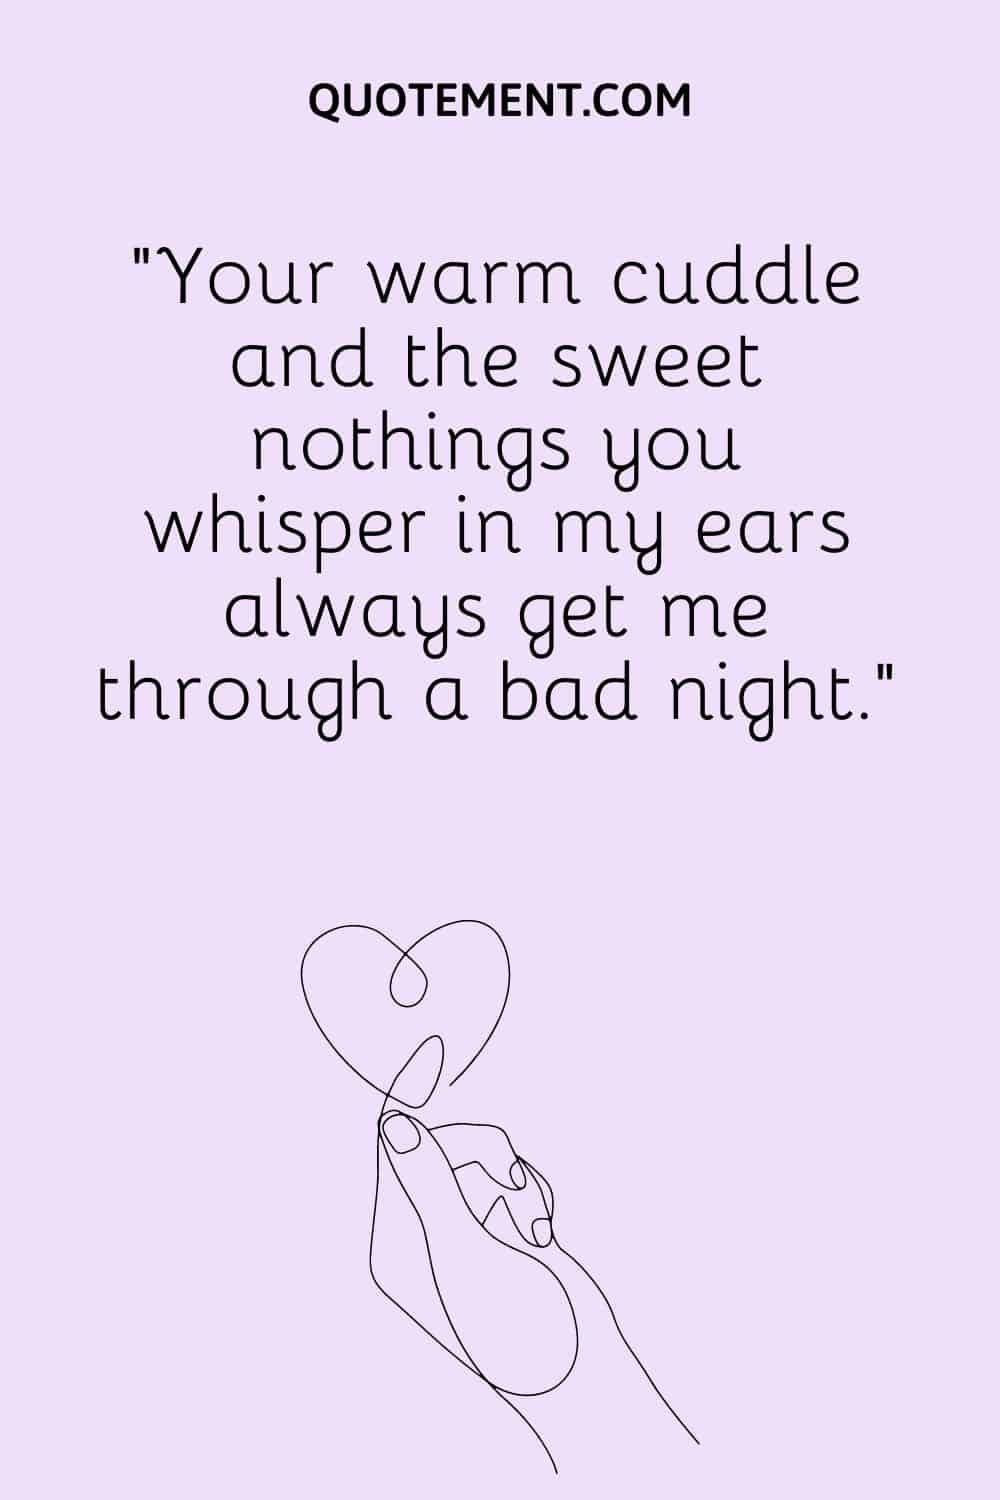 Your warm cuddle and the sweet nothings you whisper in my ears always get me through a bad night